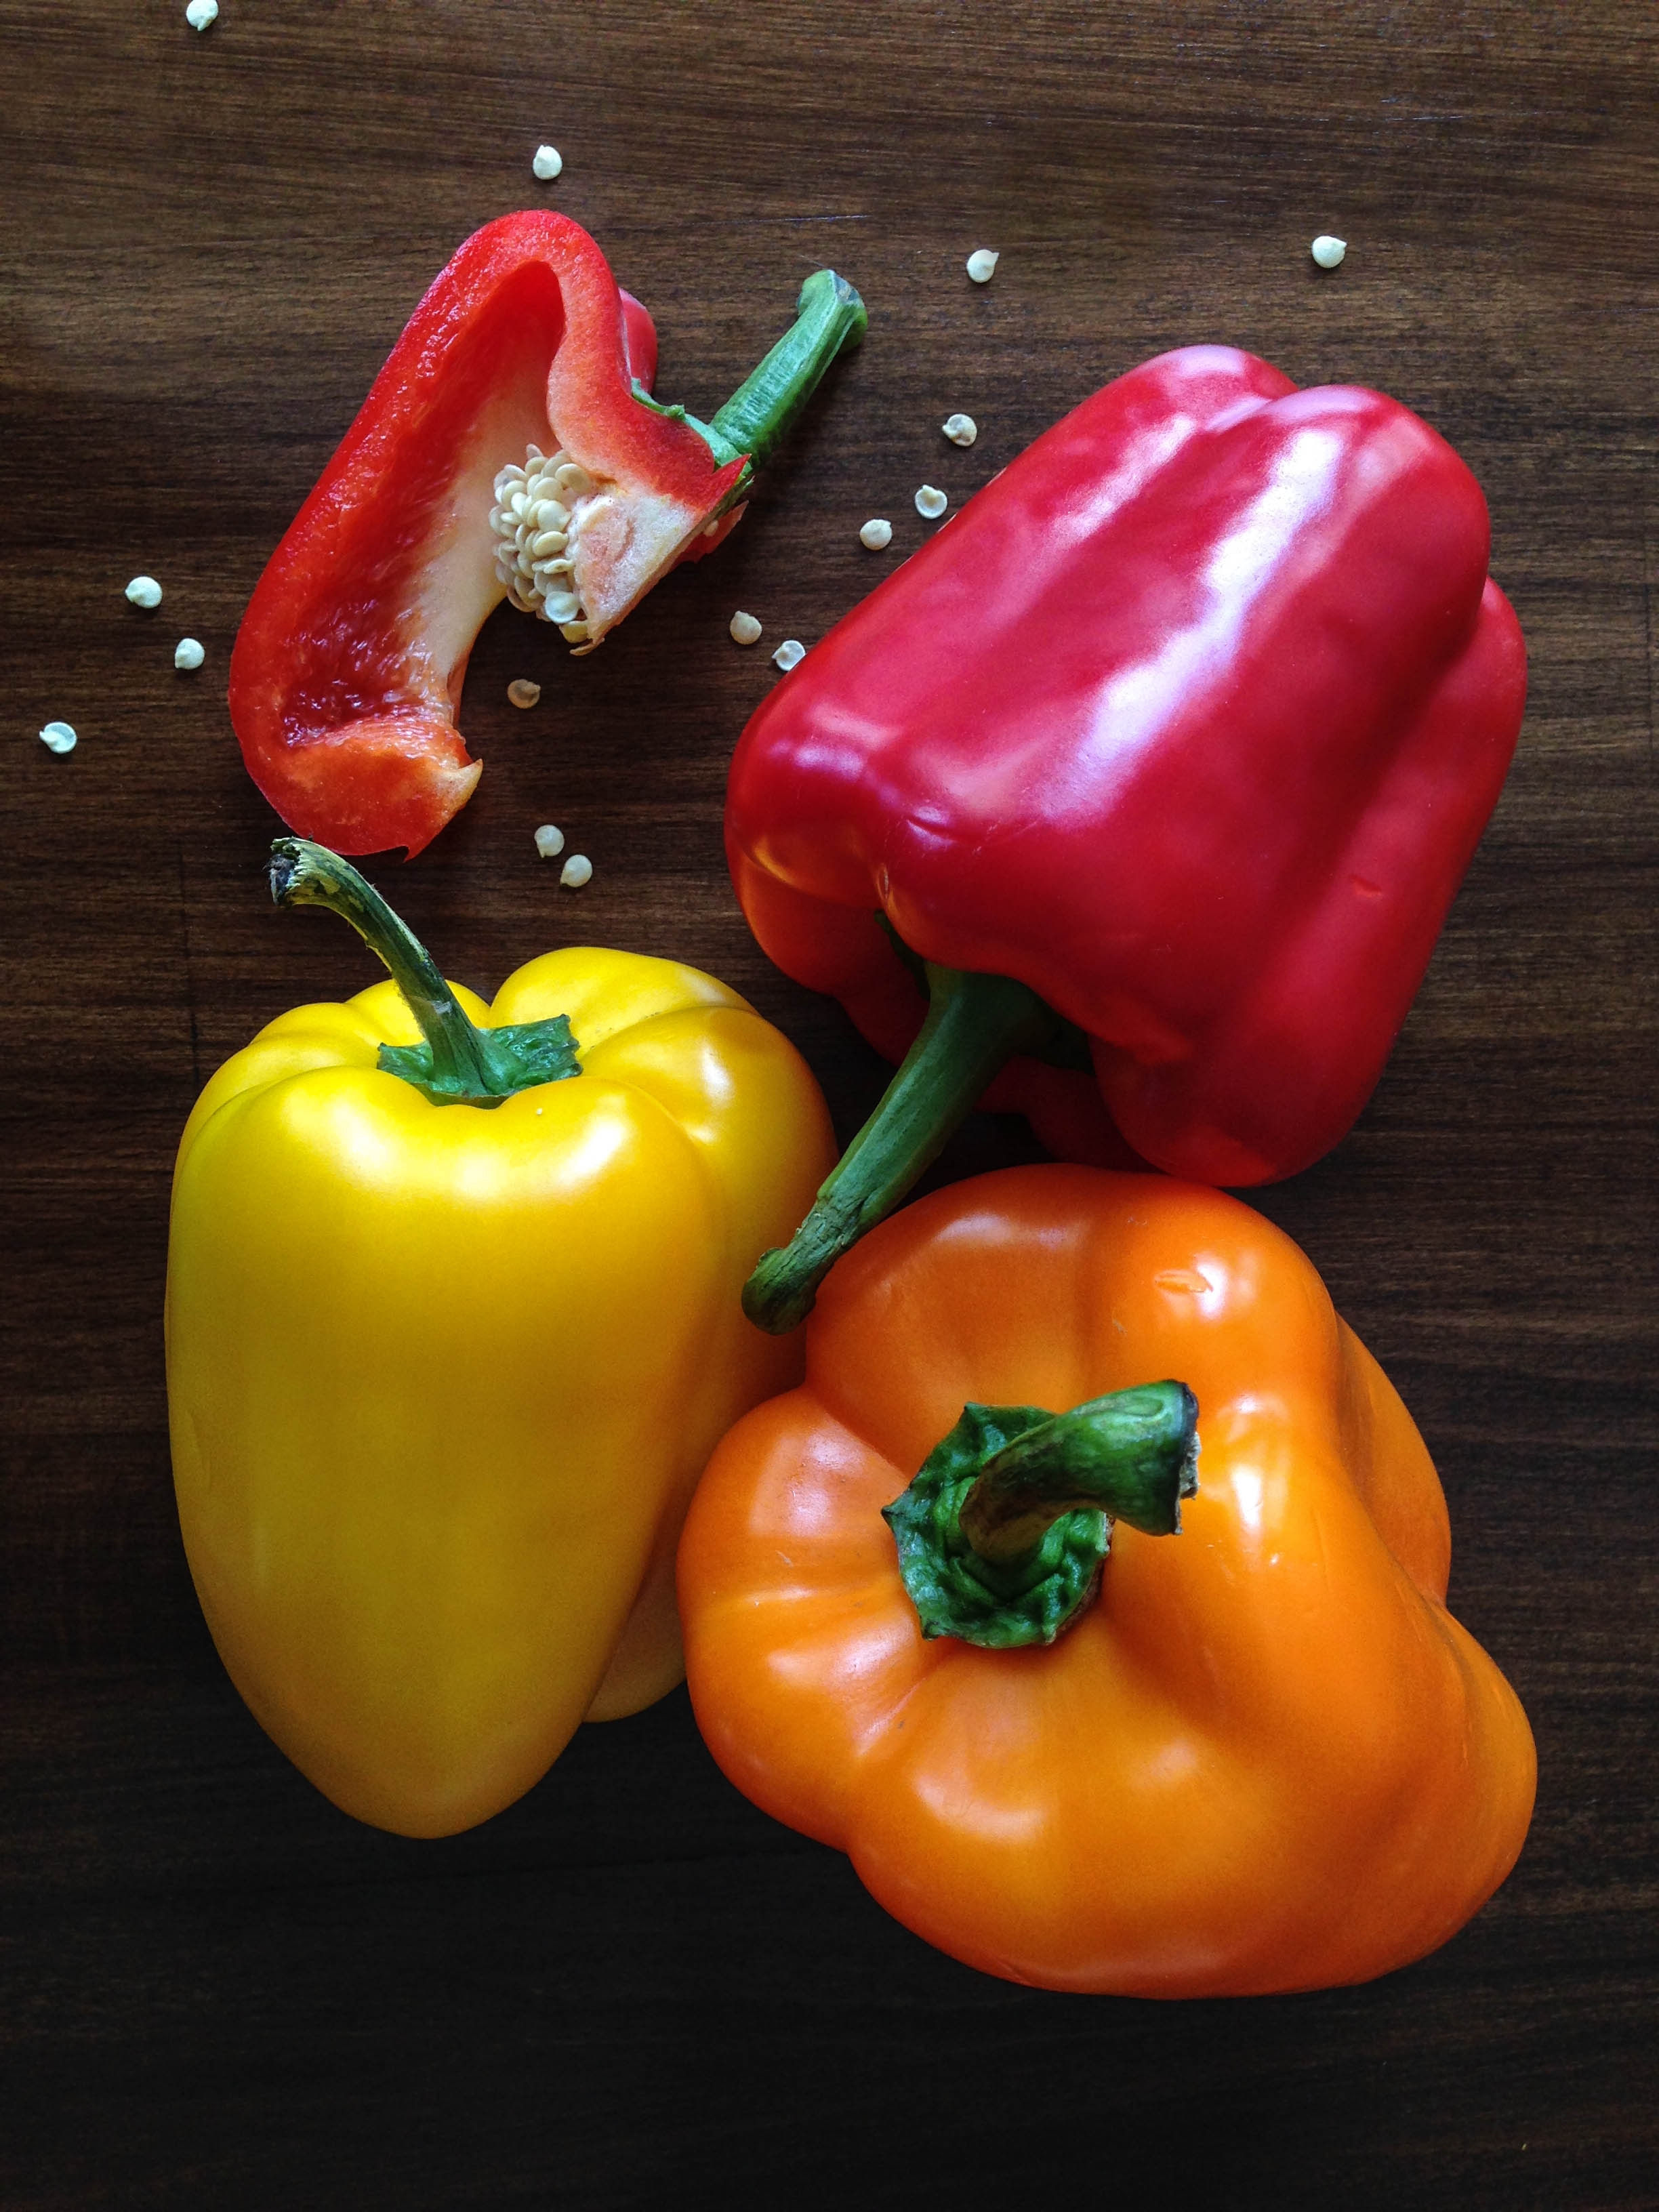 red yellow and orange bell peppers